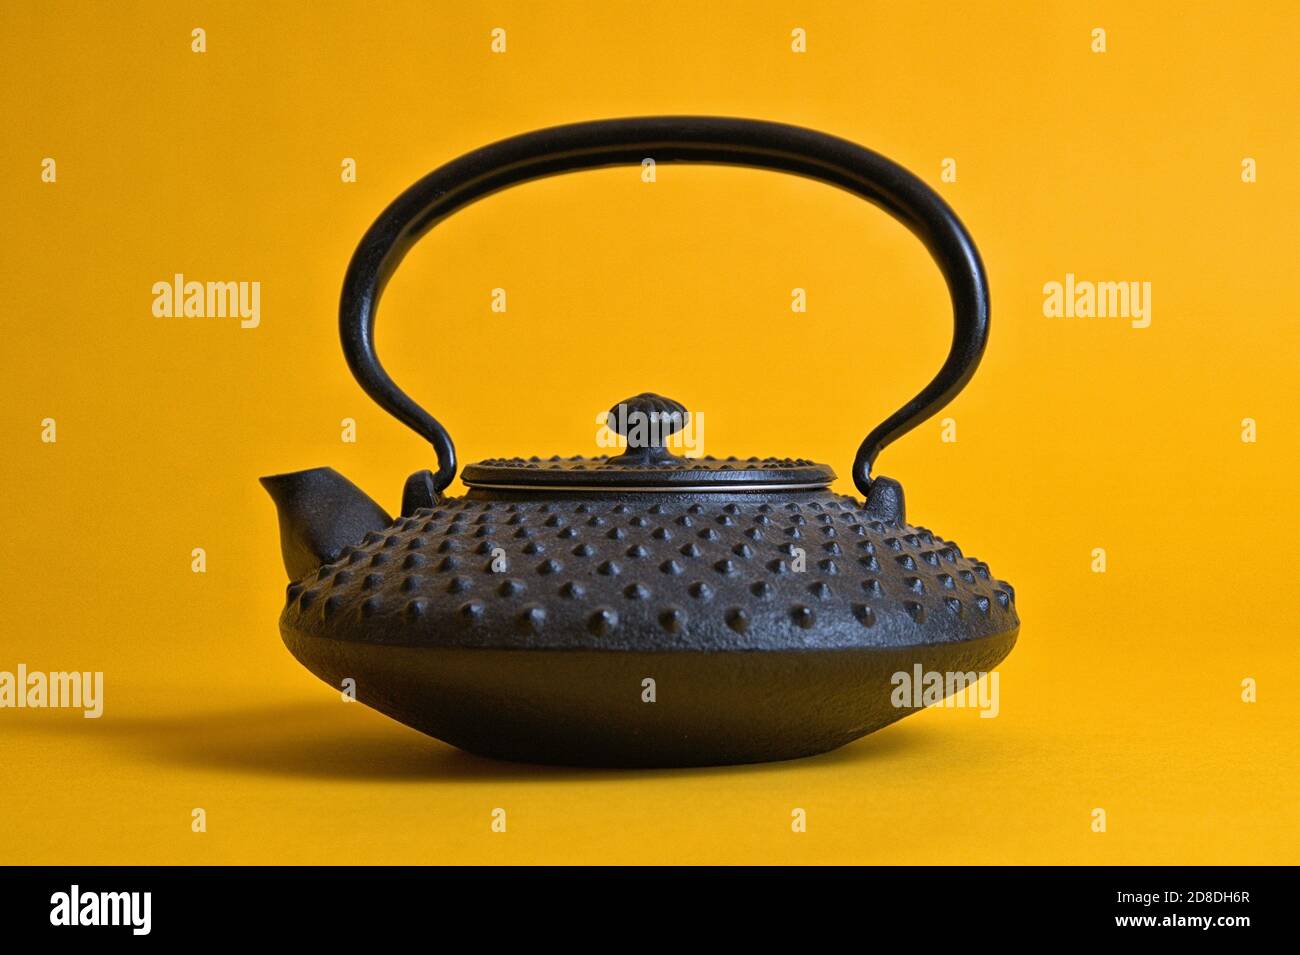 https://c8.alamy.com/comp/2D8DH6R/schleswig-deutschland-28th-oct-2020-a-small-original-iwachu-cast-iron-teapot-from-japan-with-the-so-called-hail-pattern-arare-here-in-smaller-size-chu-arare-traditionally-these-jugs-were-not-used-as-a-teapot-but-as-a-kettle-tetsubin-in-which-the-water-was-heated-today-they-are-enamelled-on-the-inside-so-that-they-can-be-used-as-a-teapot-kyusu-photo-against-a-yellow-background-usage-worldwide-credit-dpaalamy-live-news-2D8DH6R.jpg